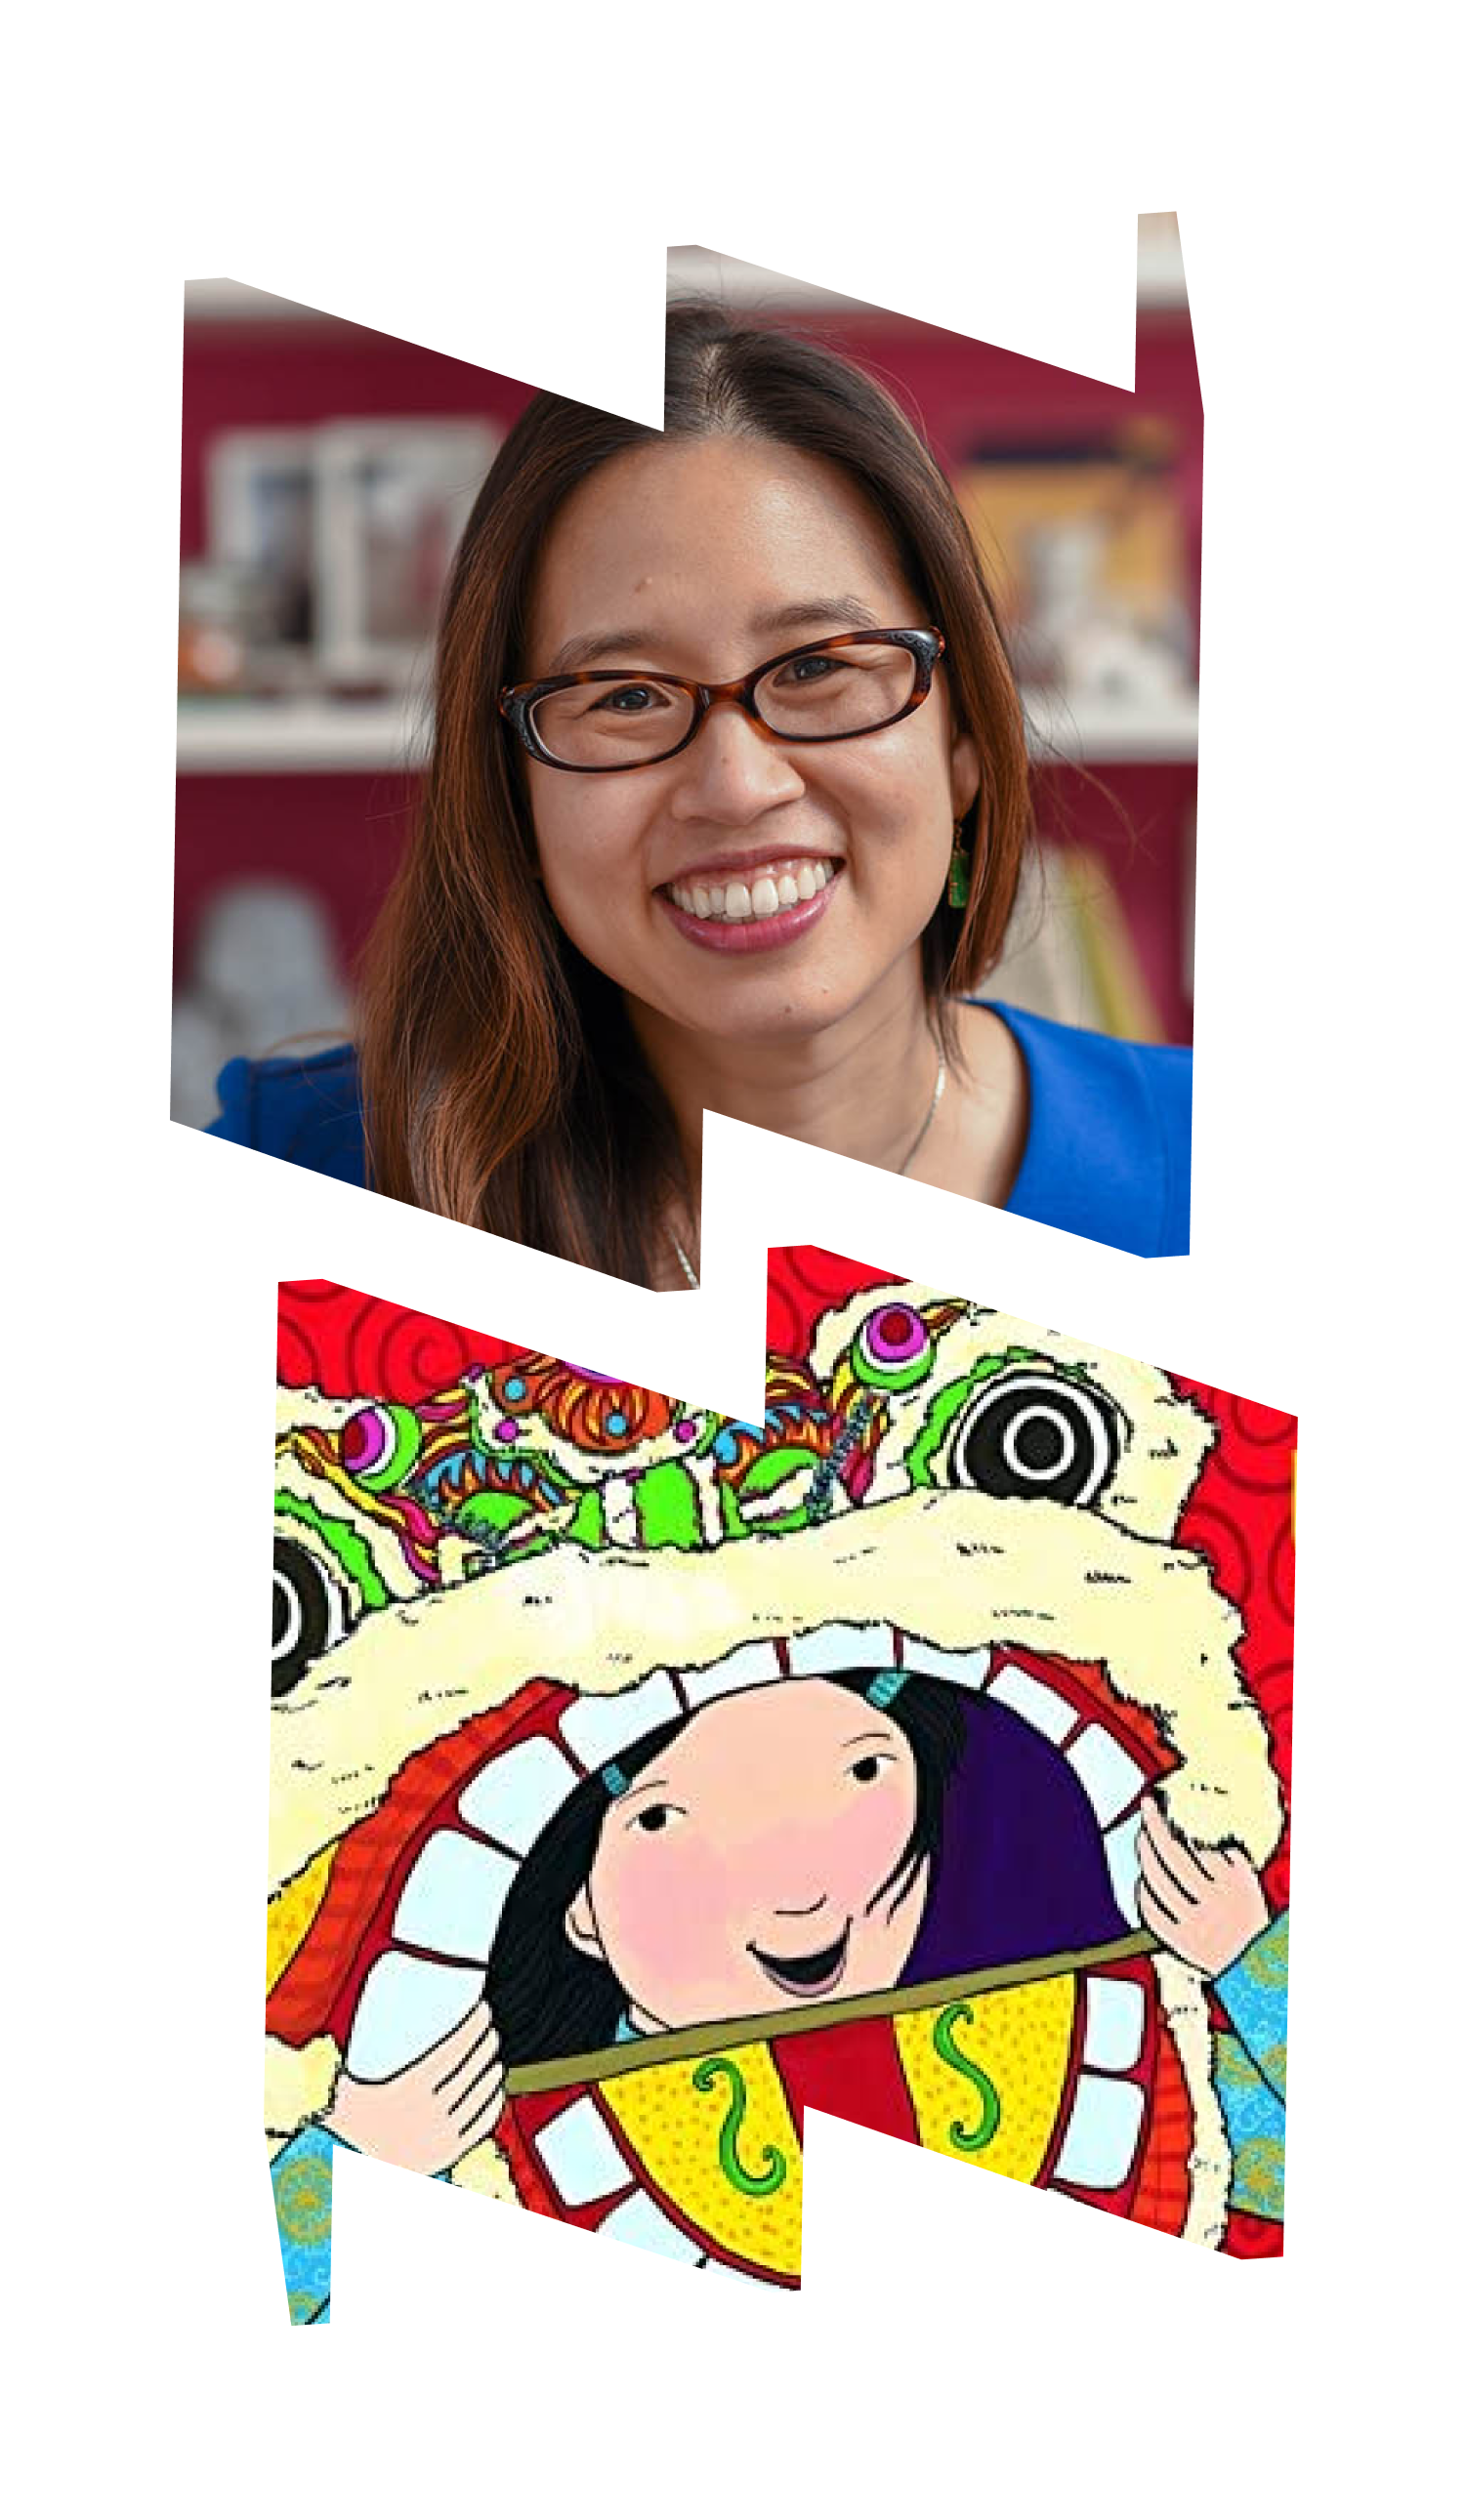 Top "W" frame with author Grace Lin. Bottom "M" frame with book cover (illustration of young girl).